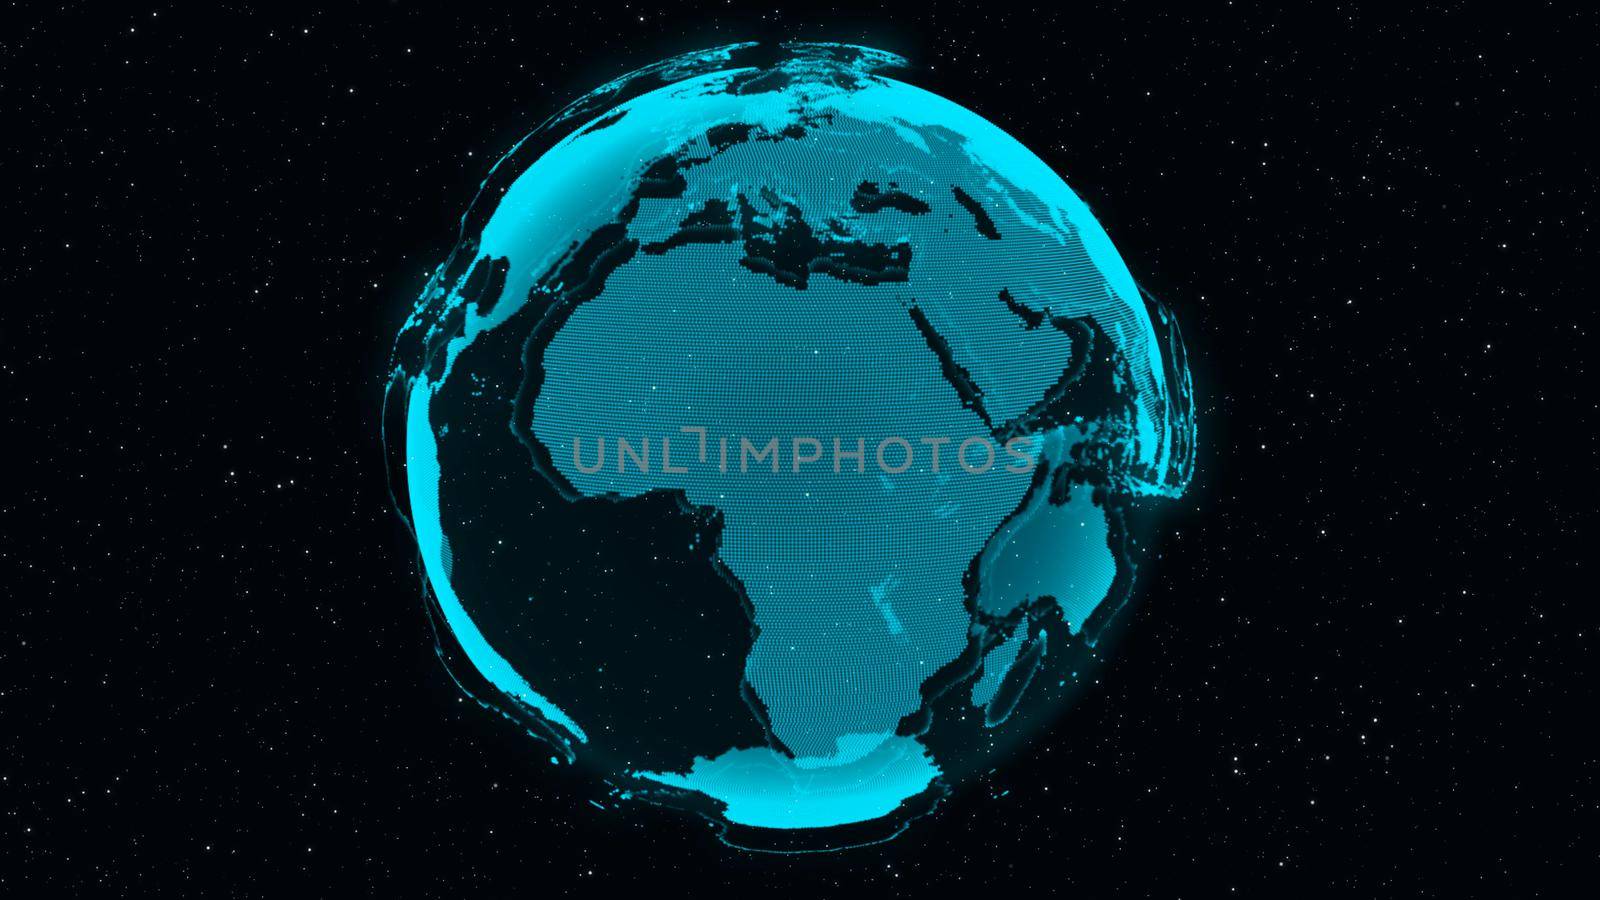 3D Digital Earth shows concept of global network connection of international people in global business rotating in stars and space background. Modern information technology and globalization concept.